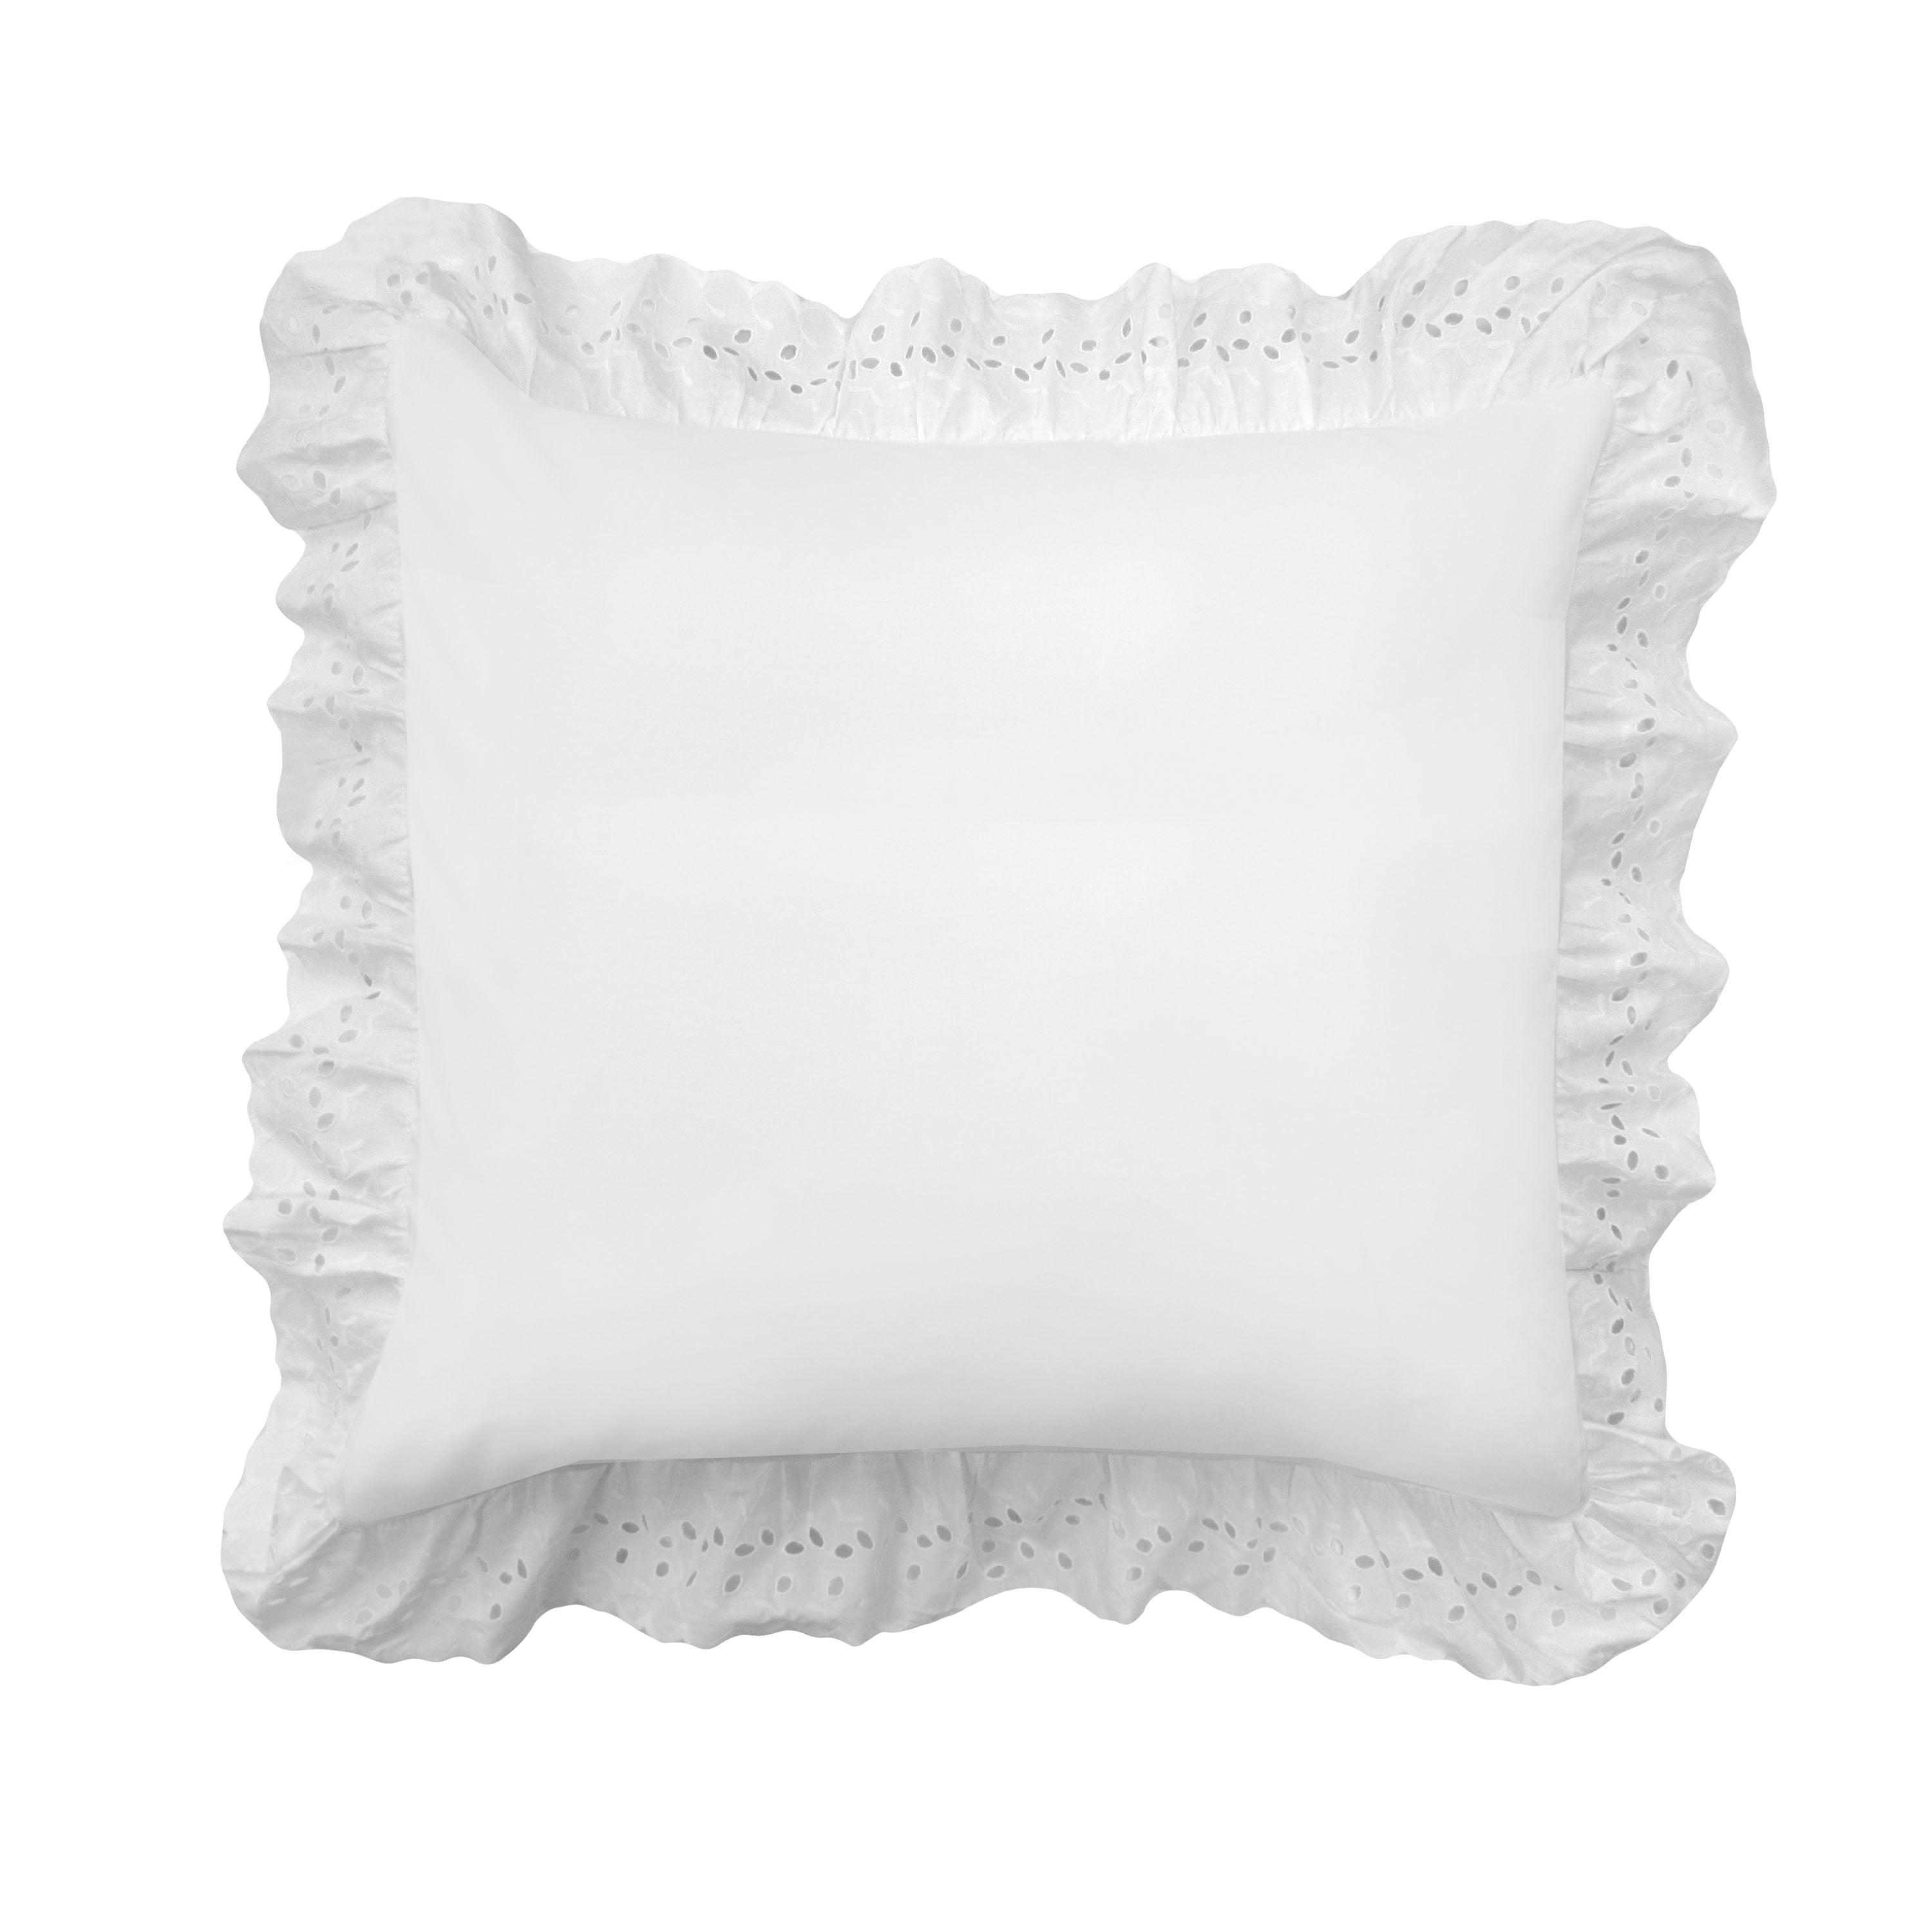 Fresh Ideas Ruffles Eyelet Collection, bed skirts and shams sold separately